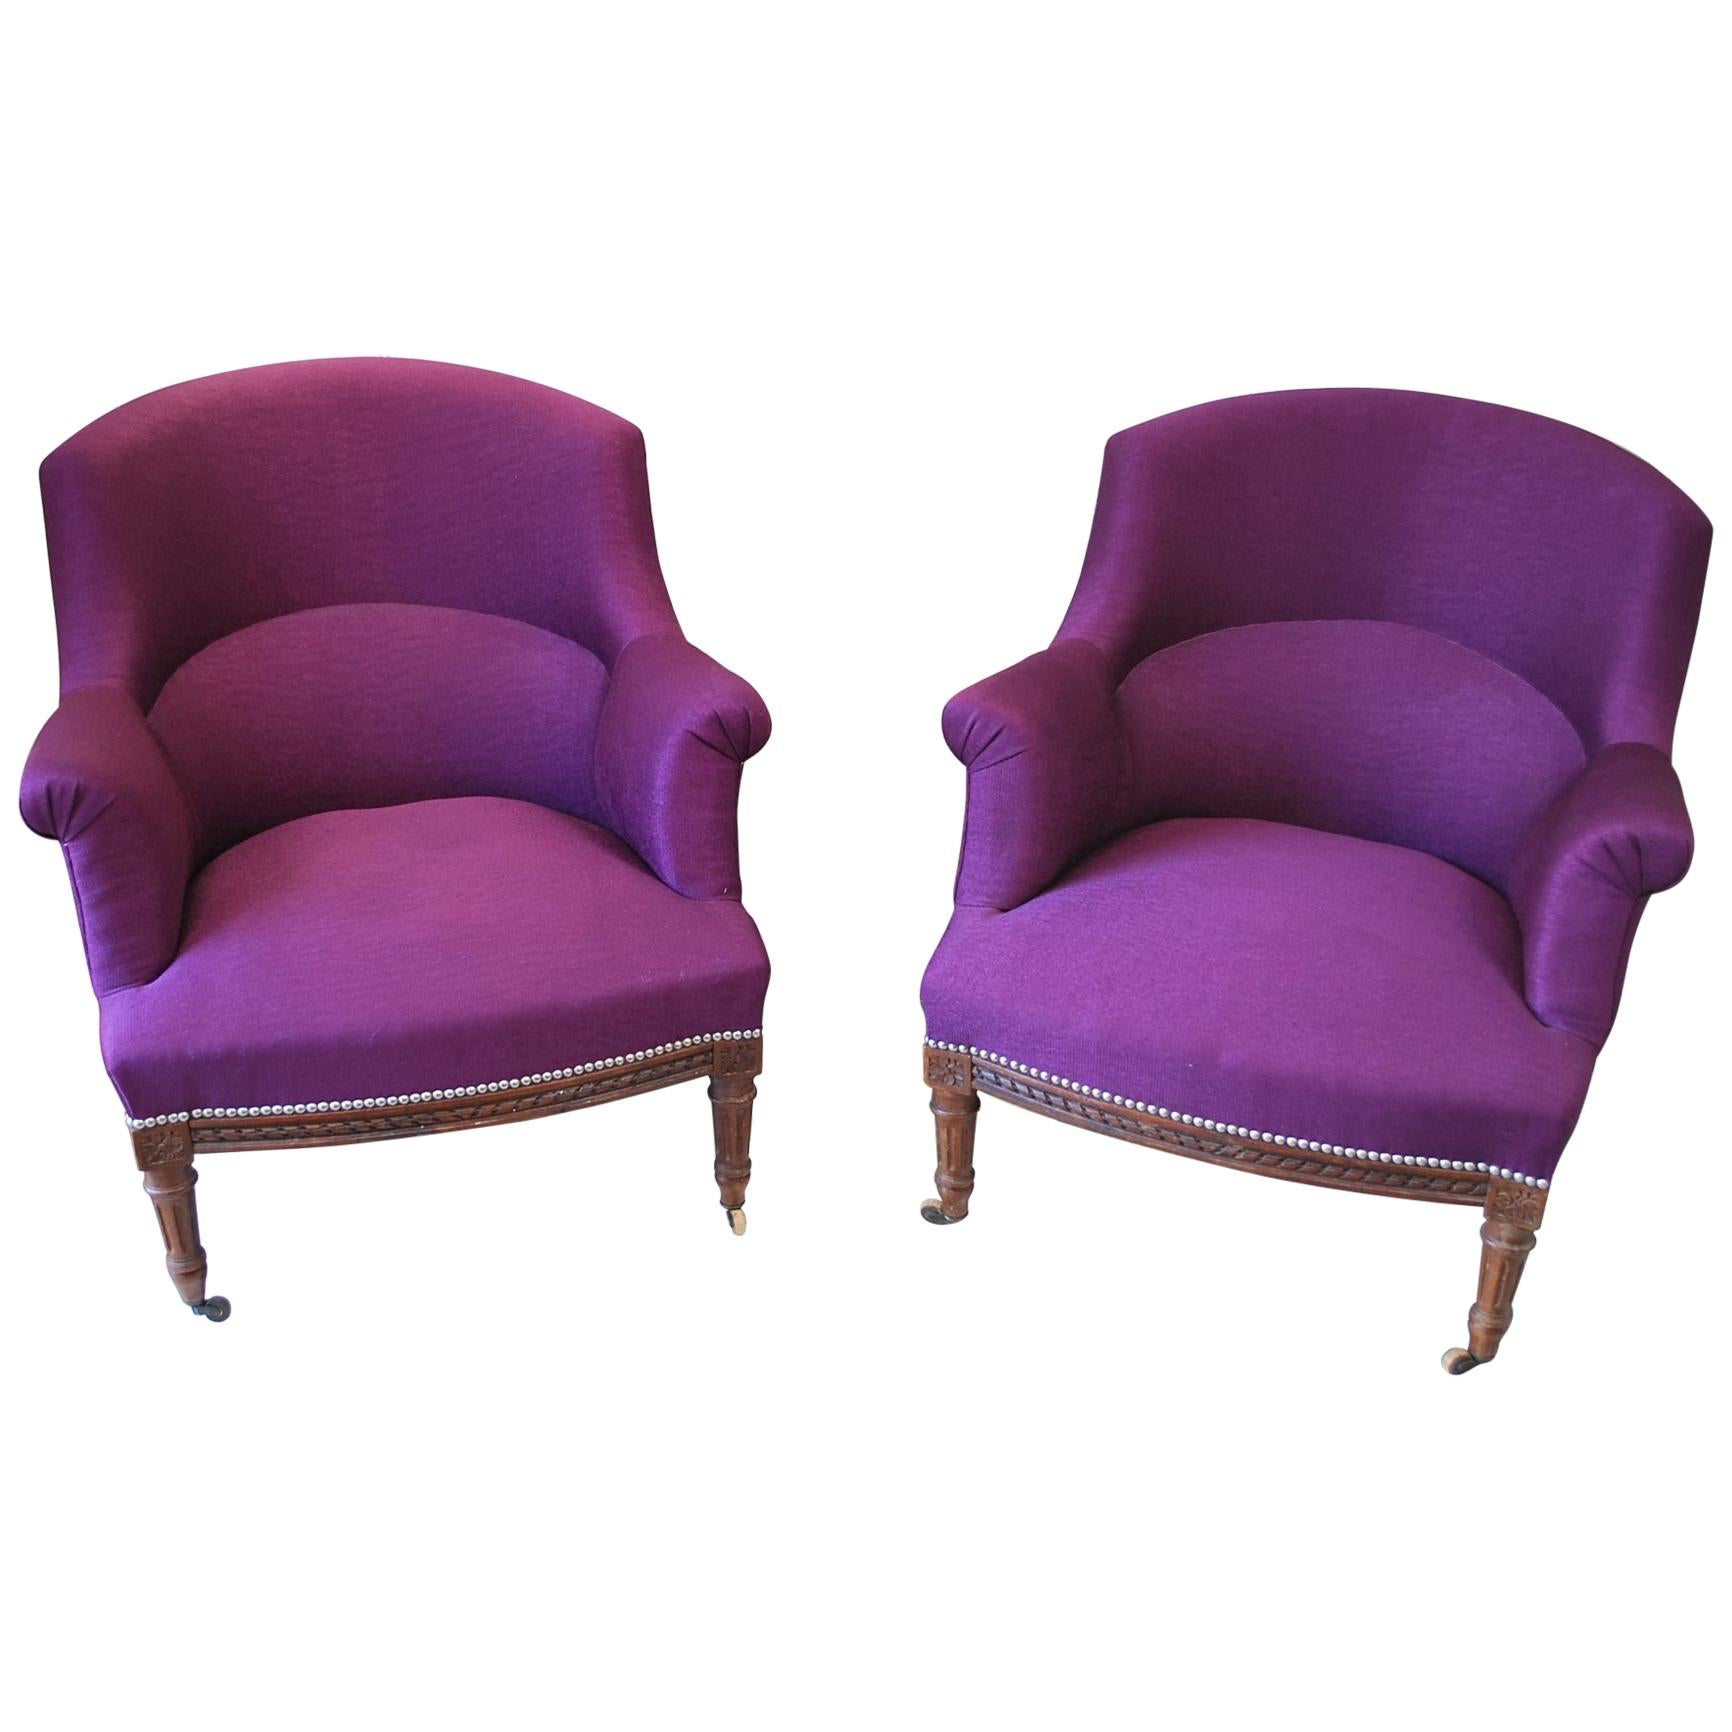 Pair of Upholstered Fauteuil Armchairs /Tub Chairs For Sale